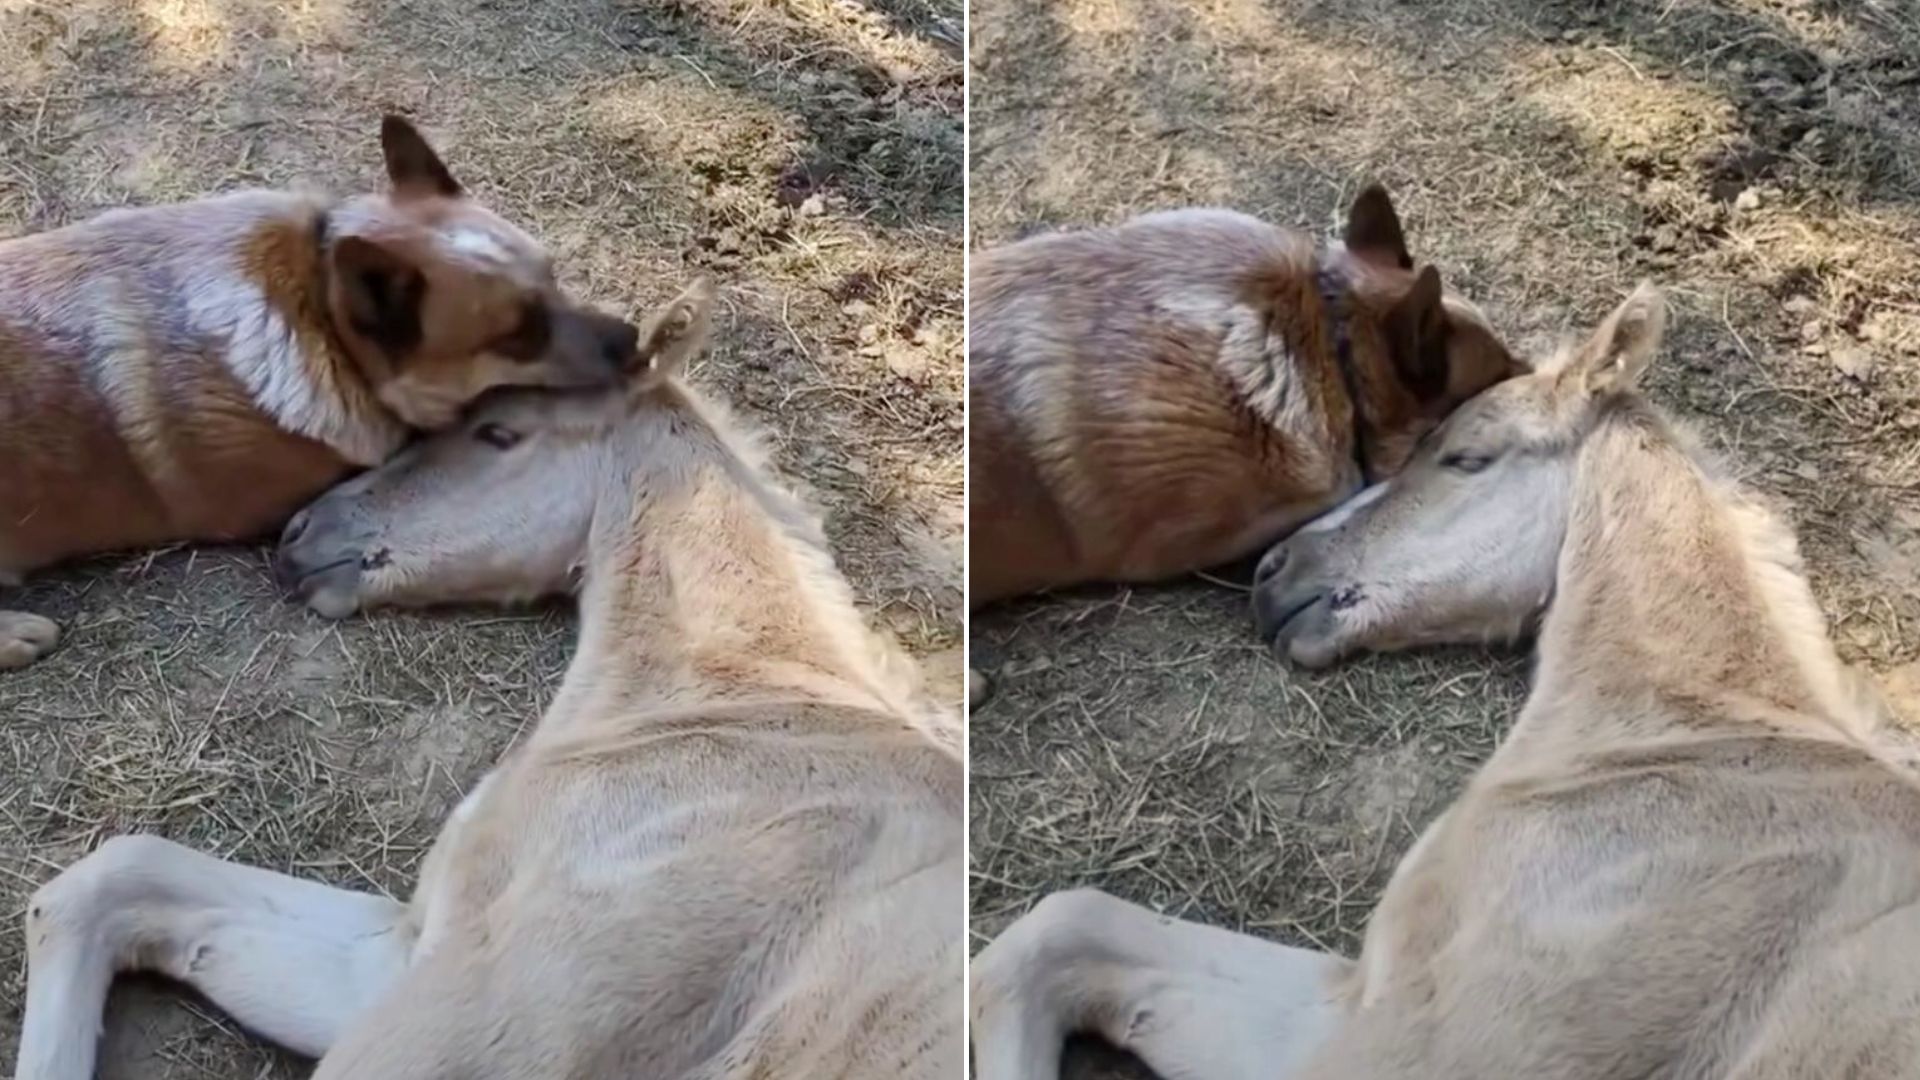 The Caring Dog Did Not Stop Comforting The Foal Until He Got Over The Loss Of His Mother